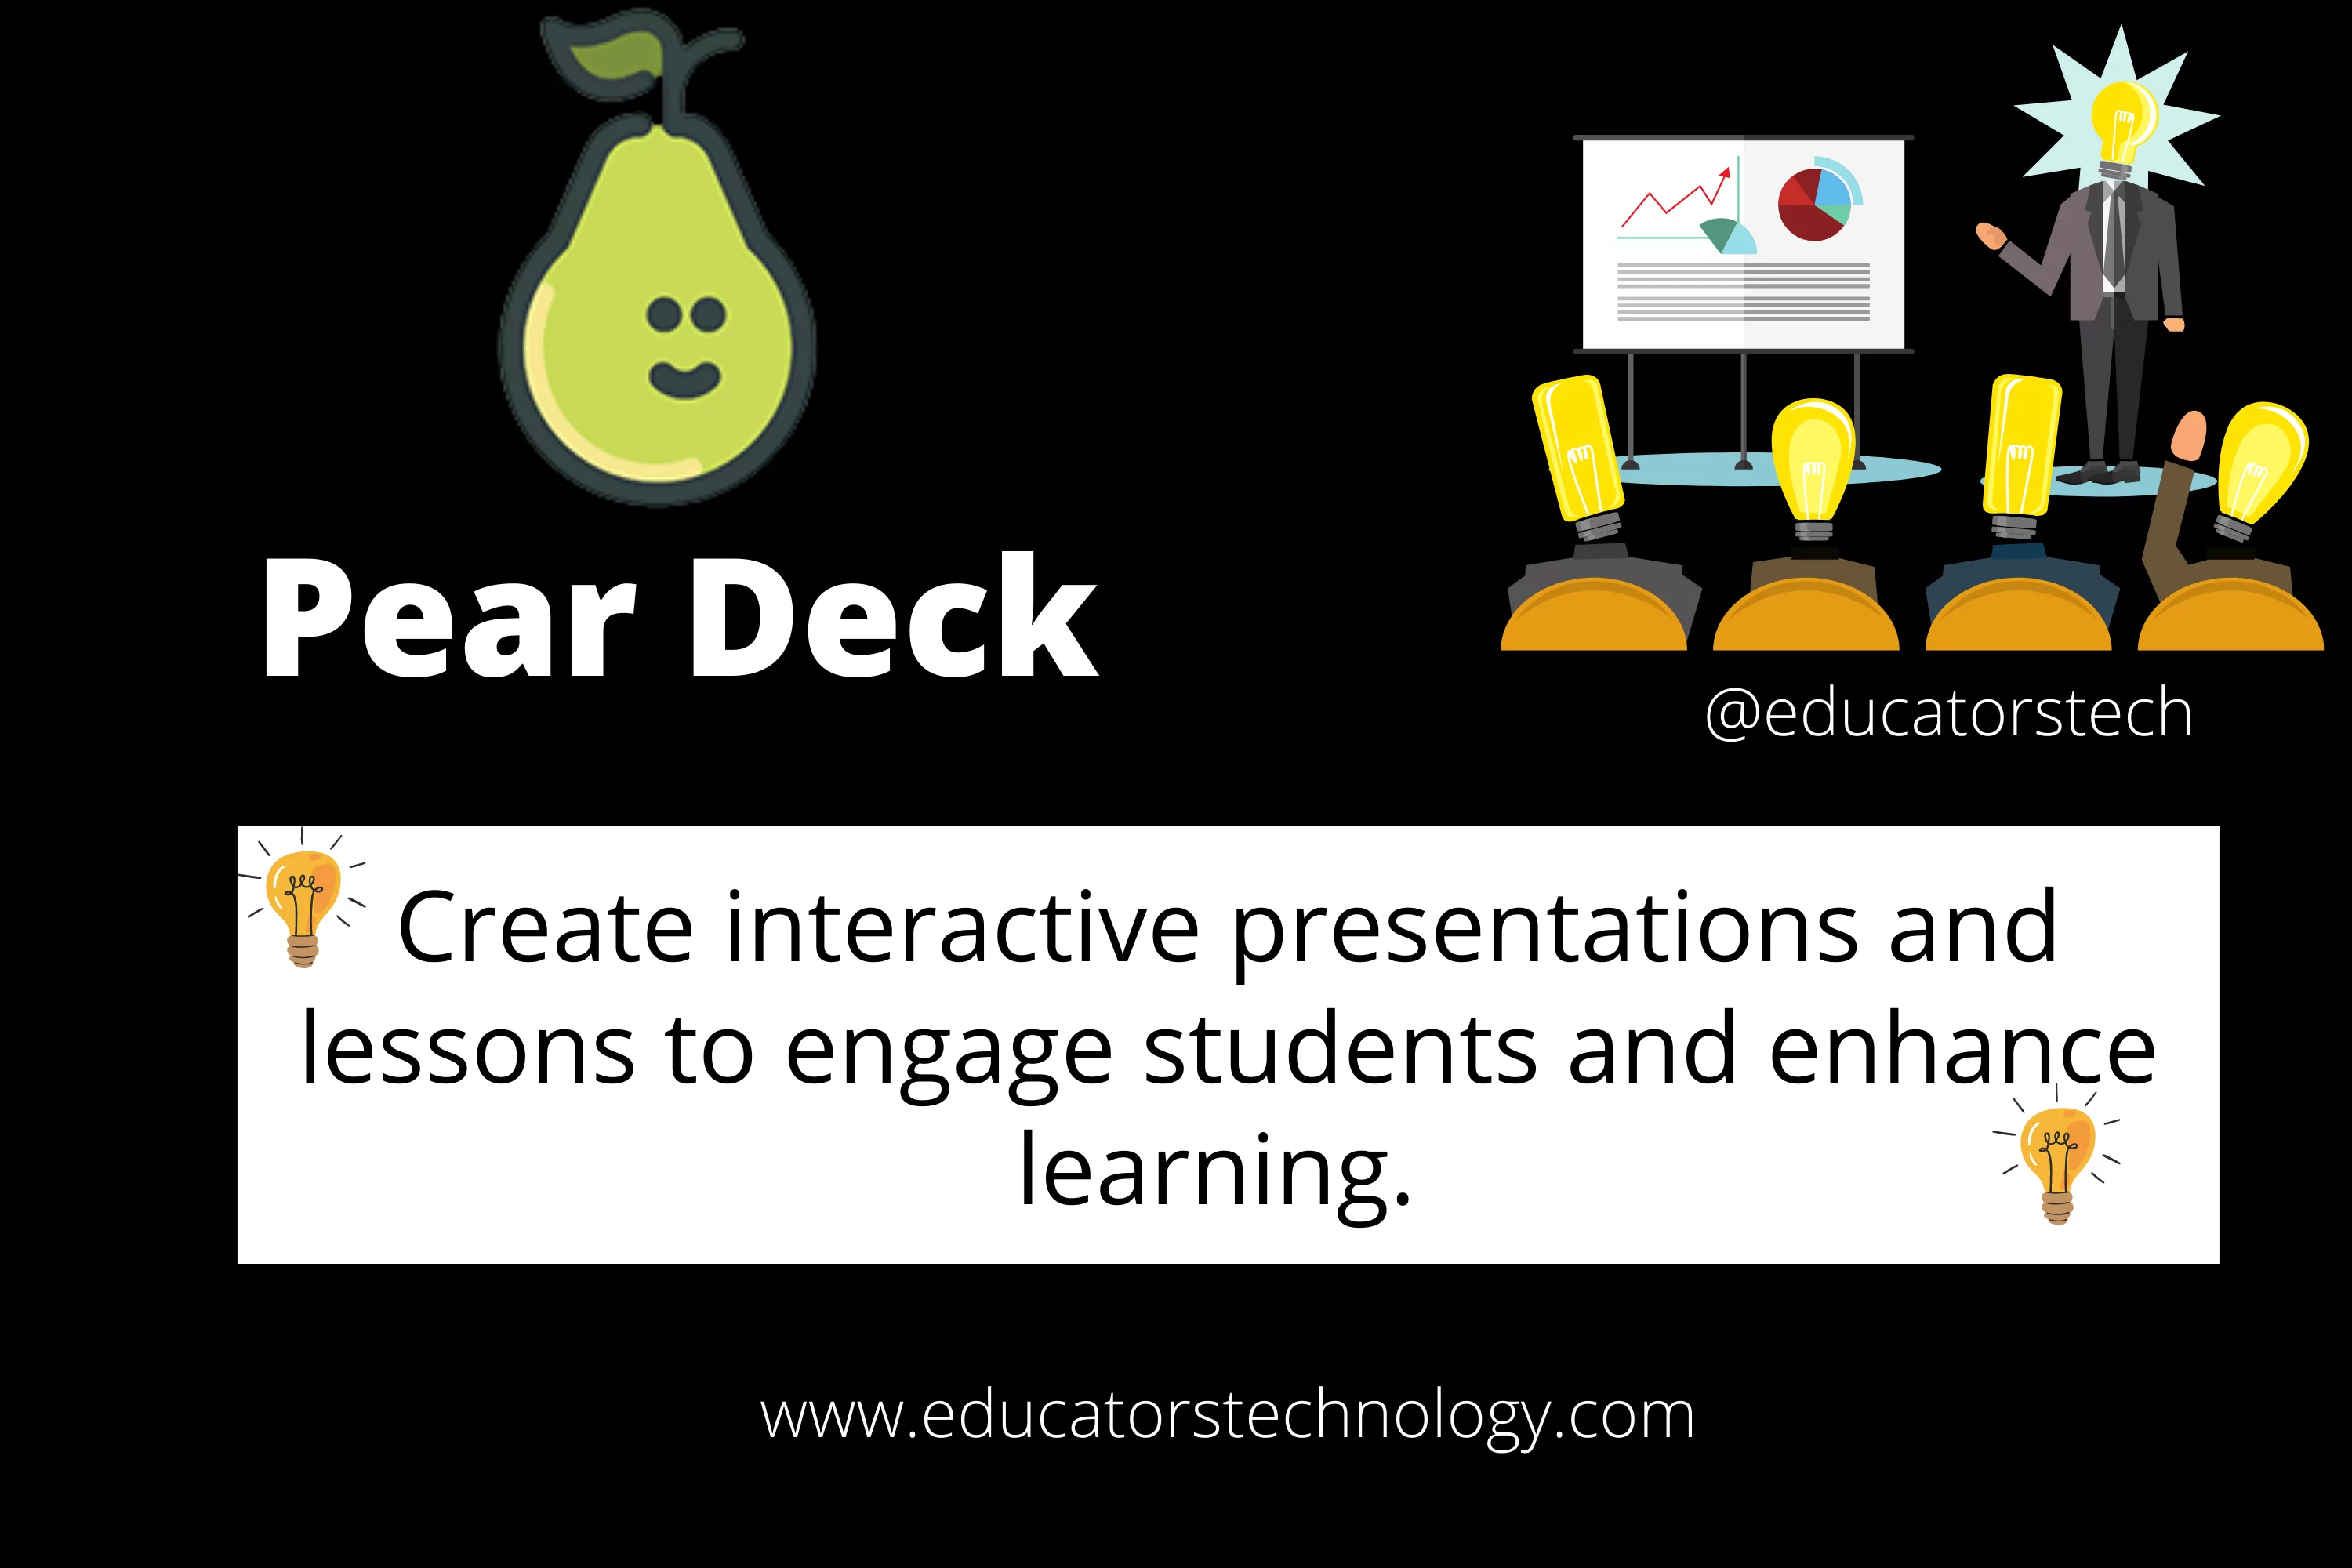 Pear Deck review for teachers